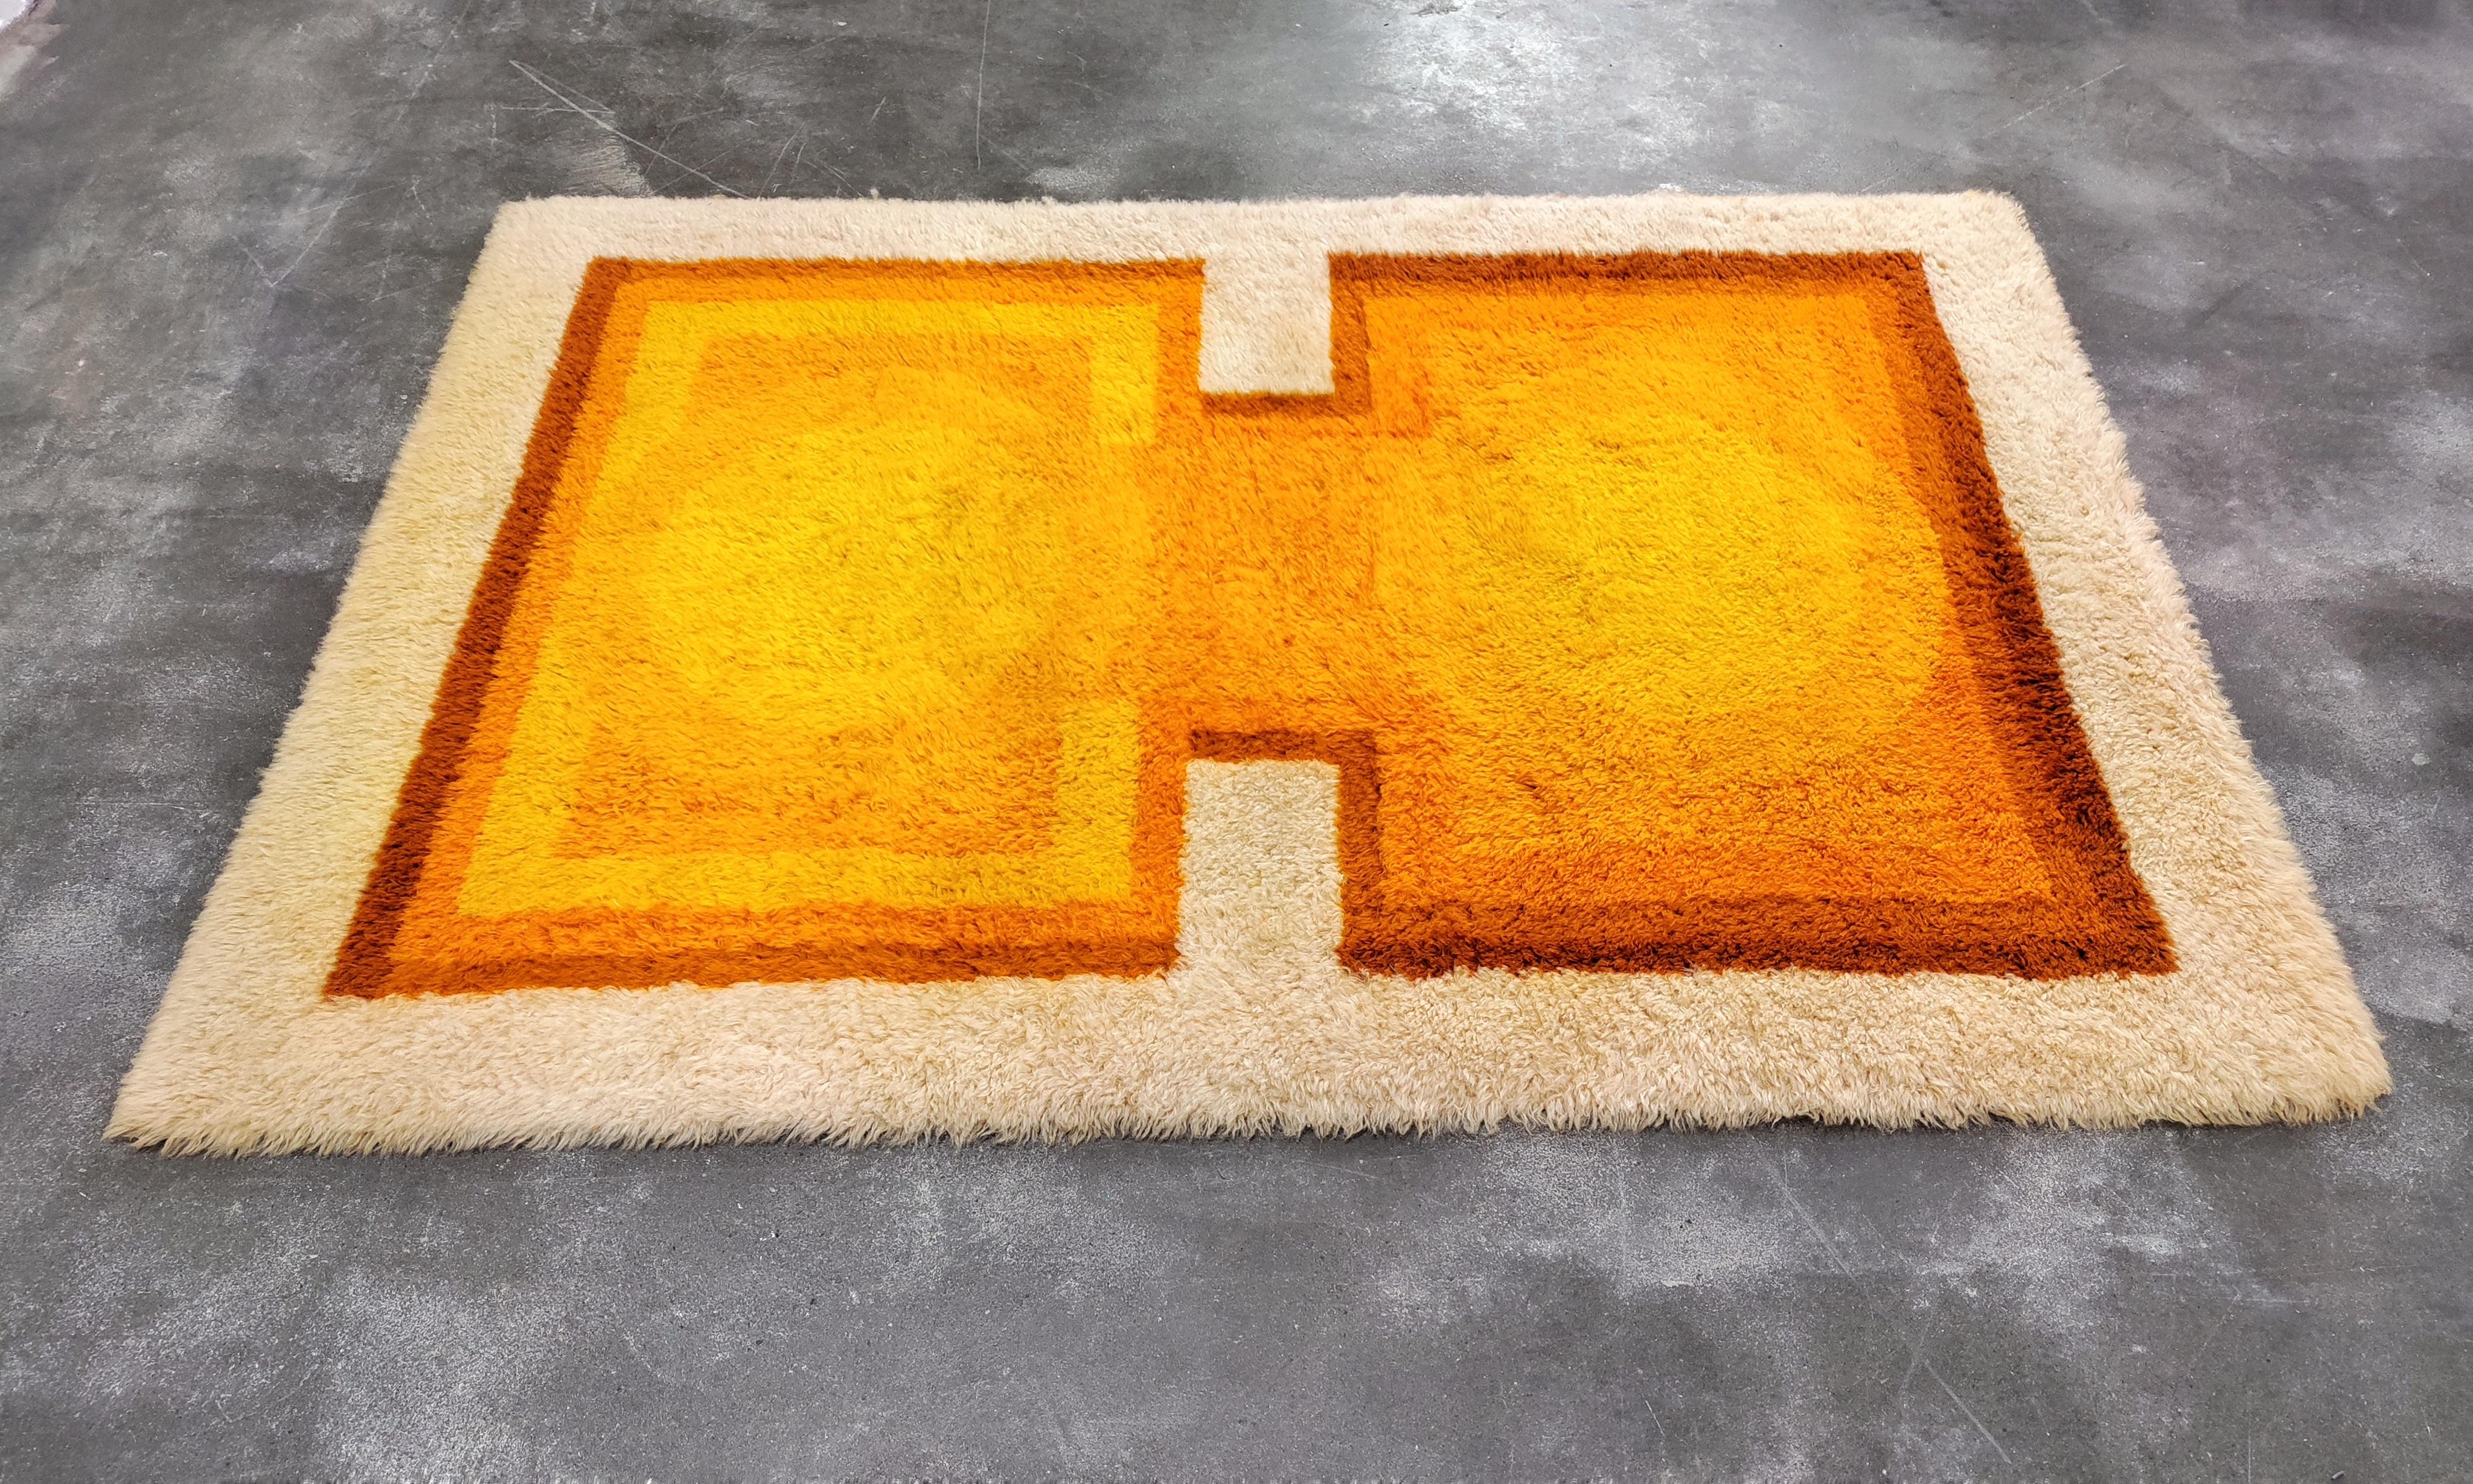 In this listing you will find an original vintage rug design by Verner Panton for Desso in the mid 1970s. The rug is part of the Romatica collection and it features soft, medium long wool in various shades of yellow. Manufacturer's label is still